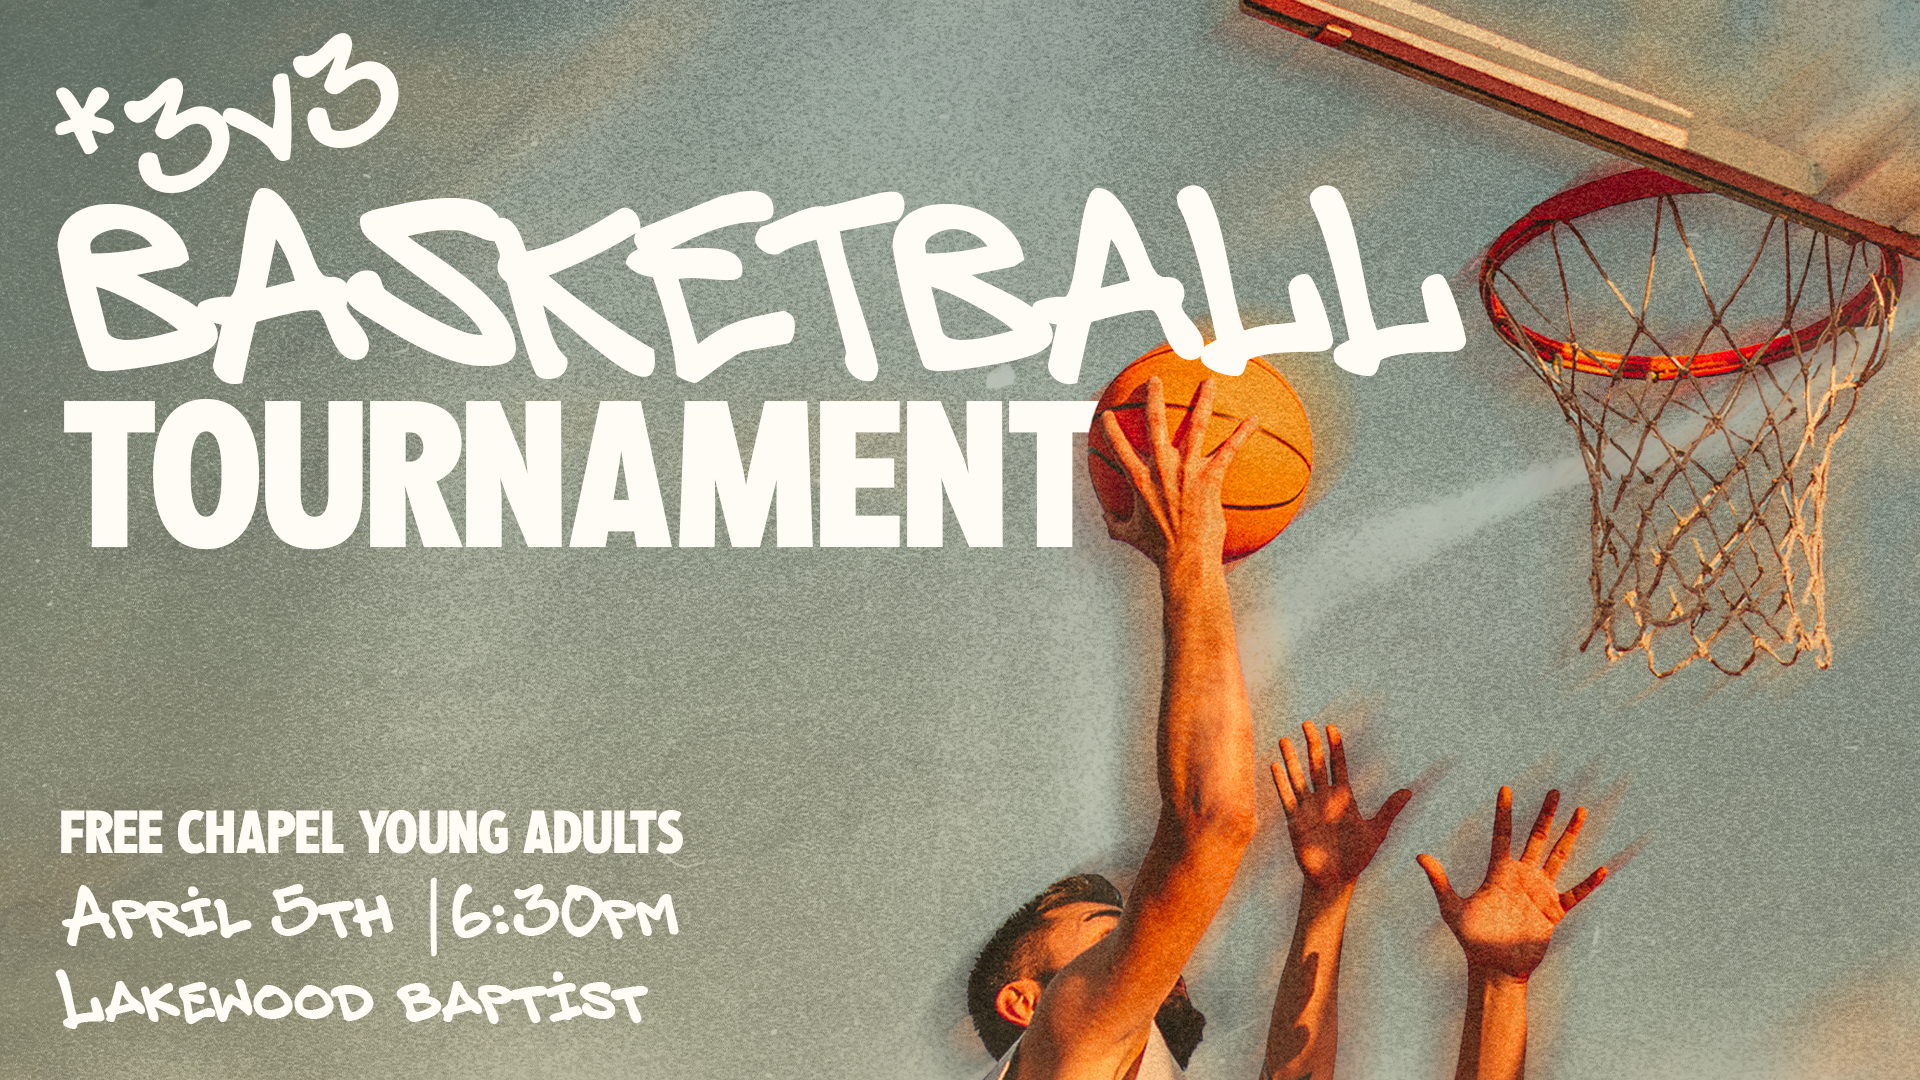 FCYA 3v3 Basketball Tournament  at the Braselton campus